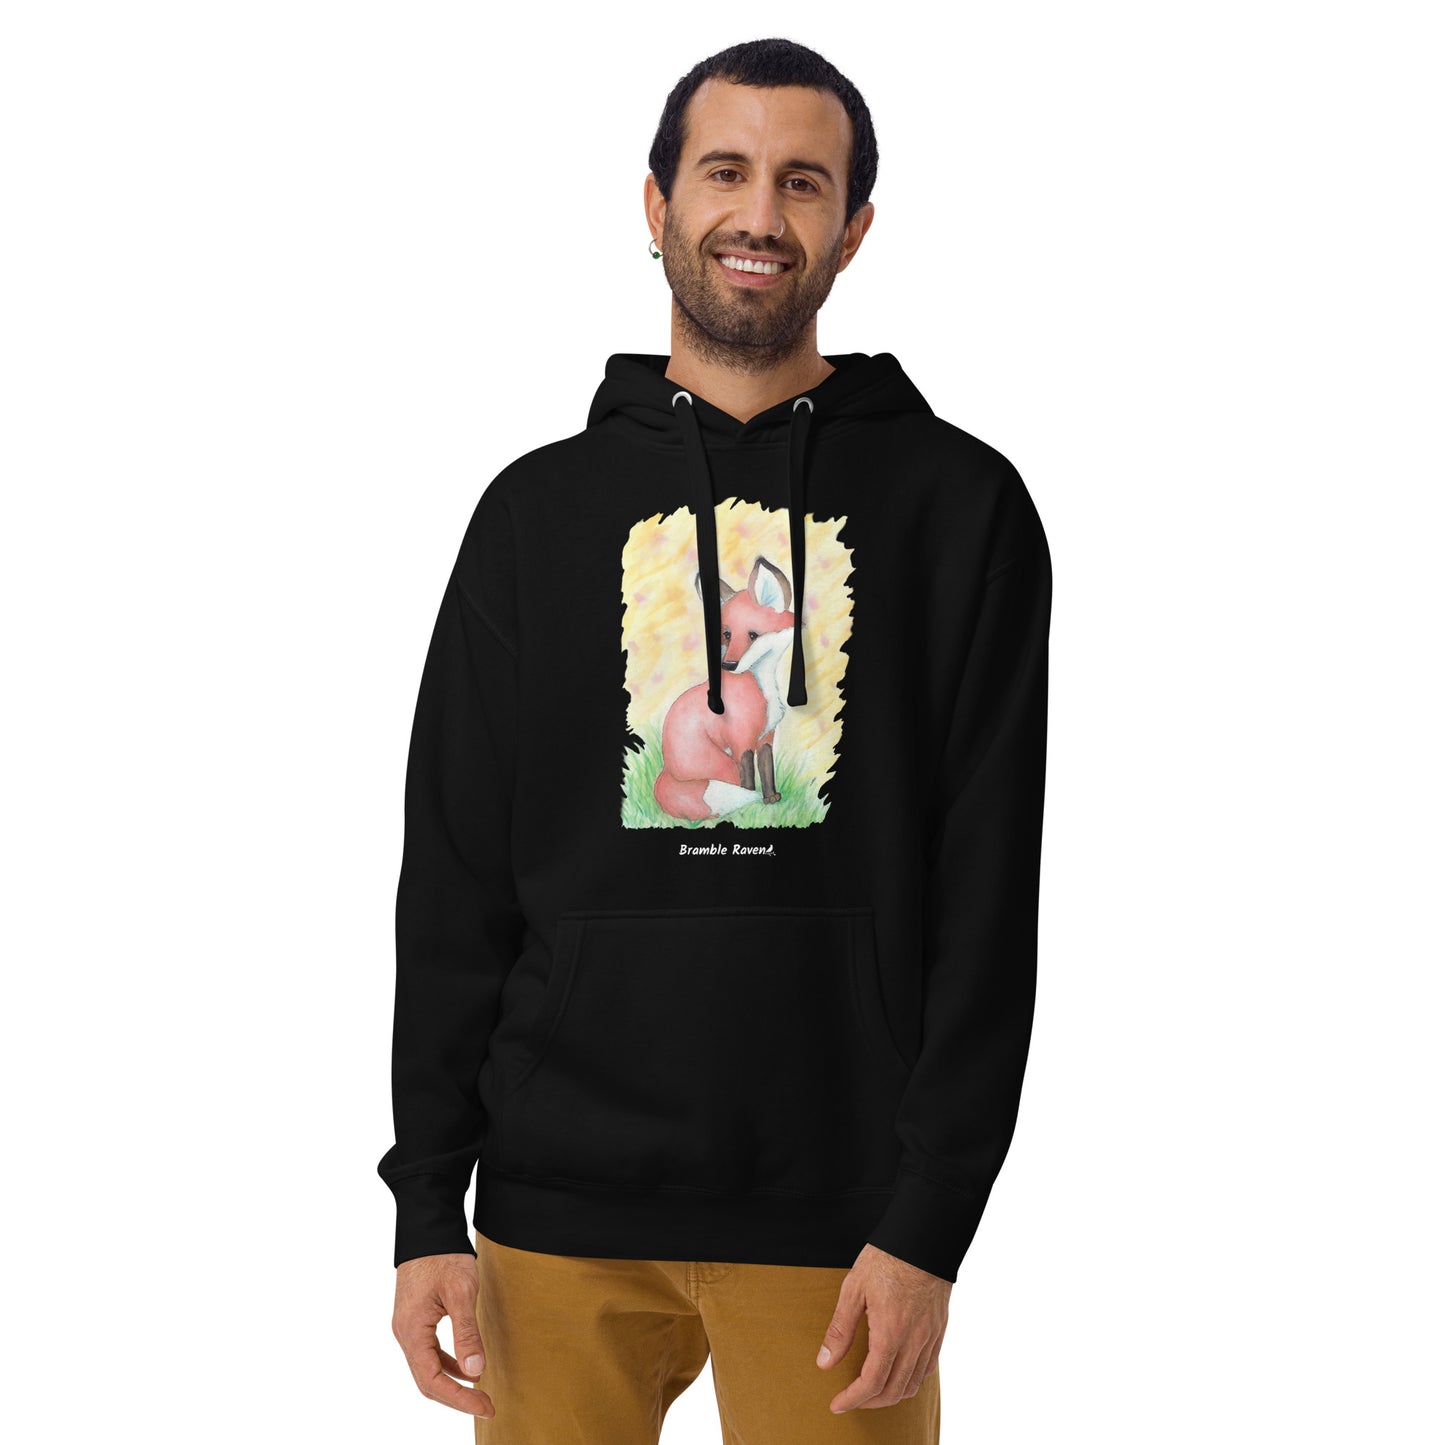 Unisex black colored hoodie. Features original watercolor painting of a fox in the grass against a yellow backdrop. Shown on male model.